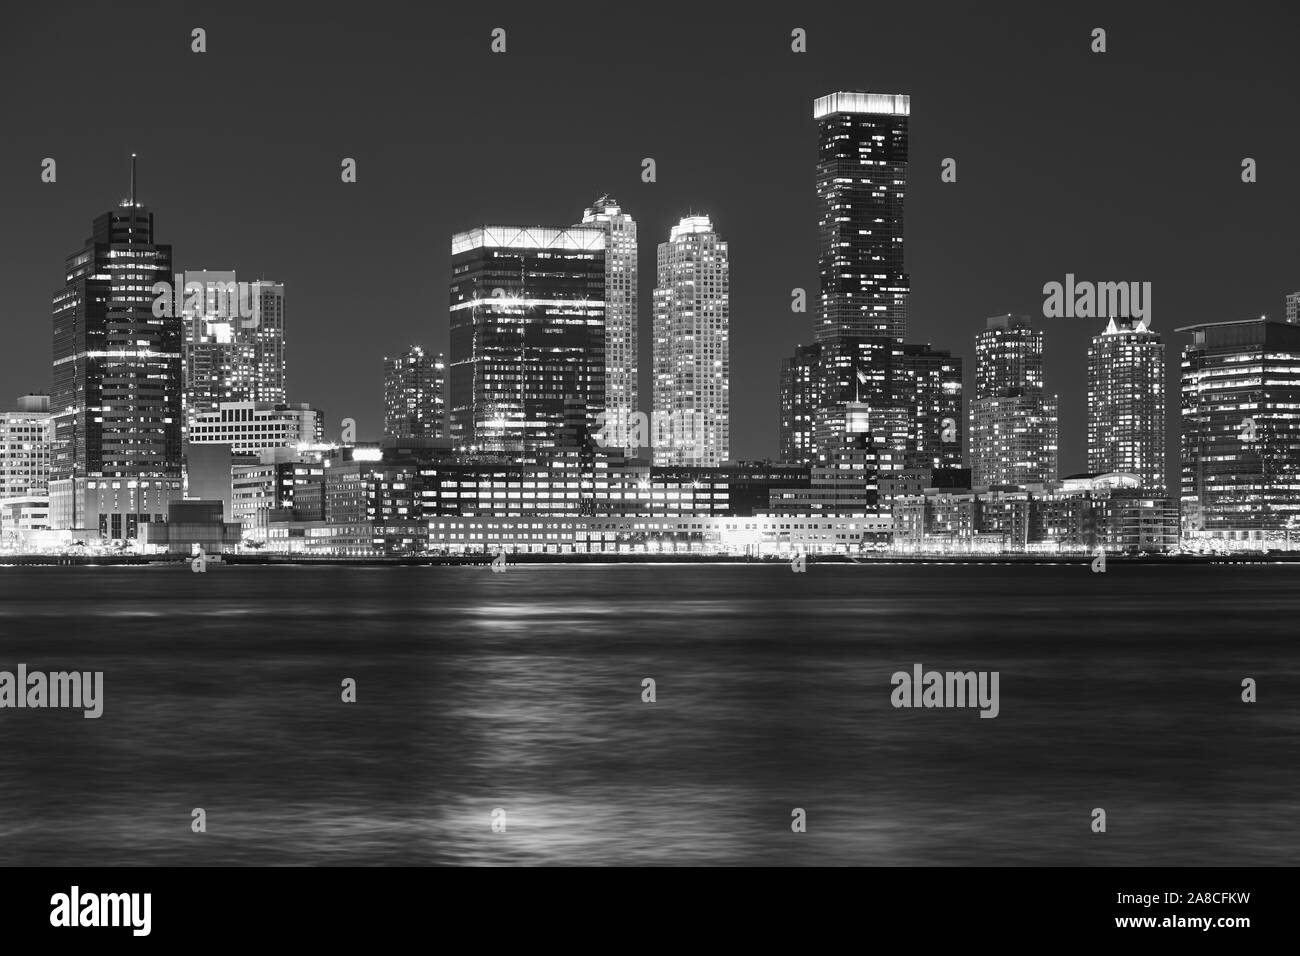 Jersey city Black and White Stock Photos & Images - Alamy